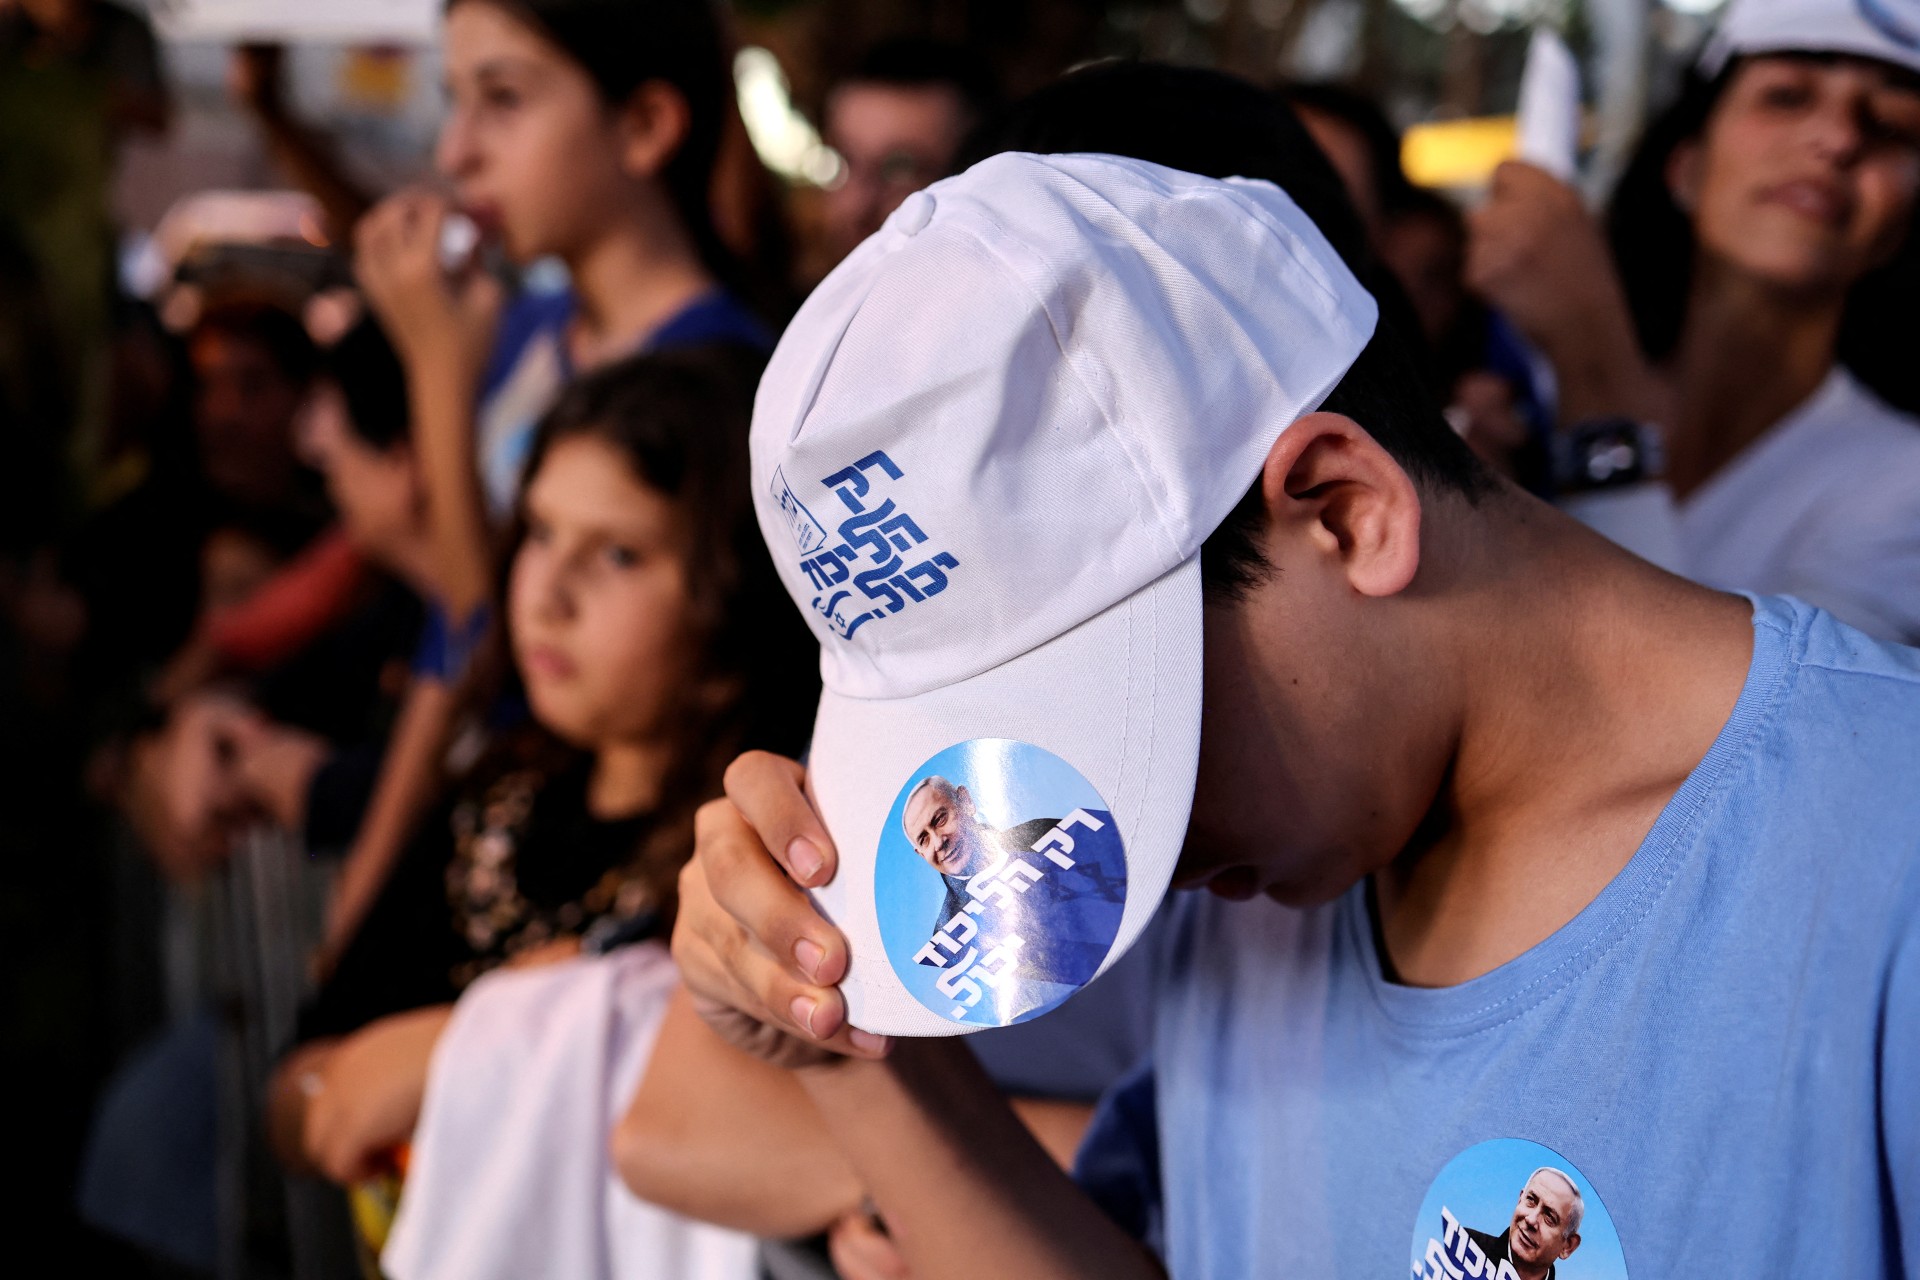 A supporter of Benjamin Netanyahu wears a hat displaying the Likud party slogan at a campaign event in the run up to Israel's elections in Ramat Gan (Reuters)